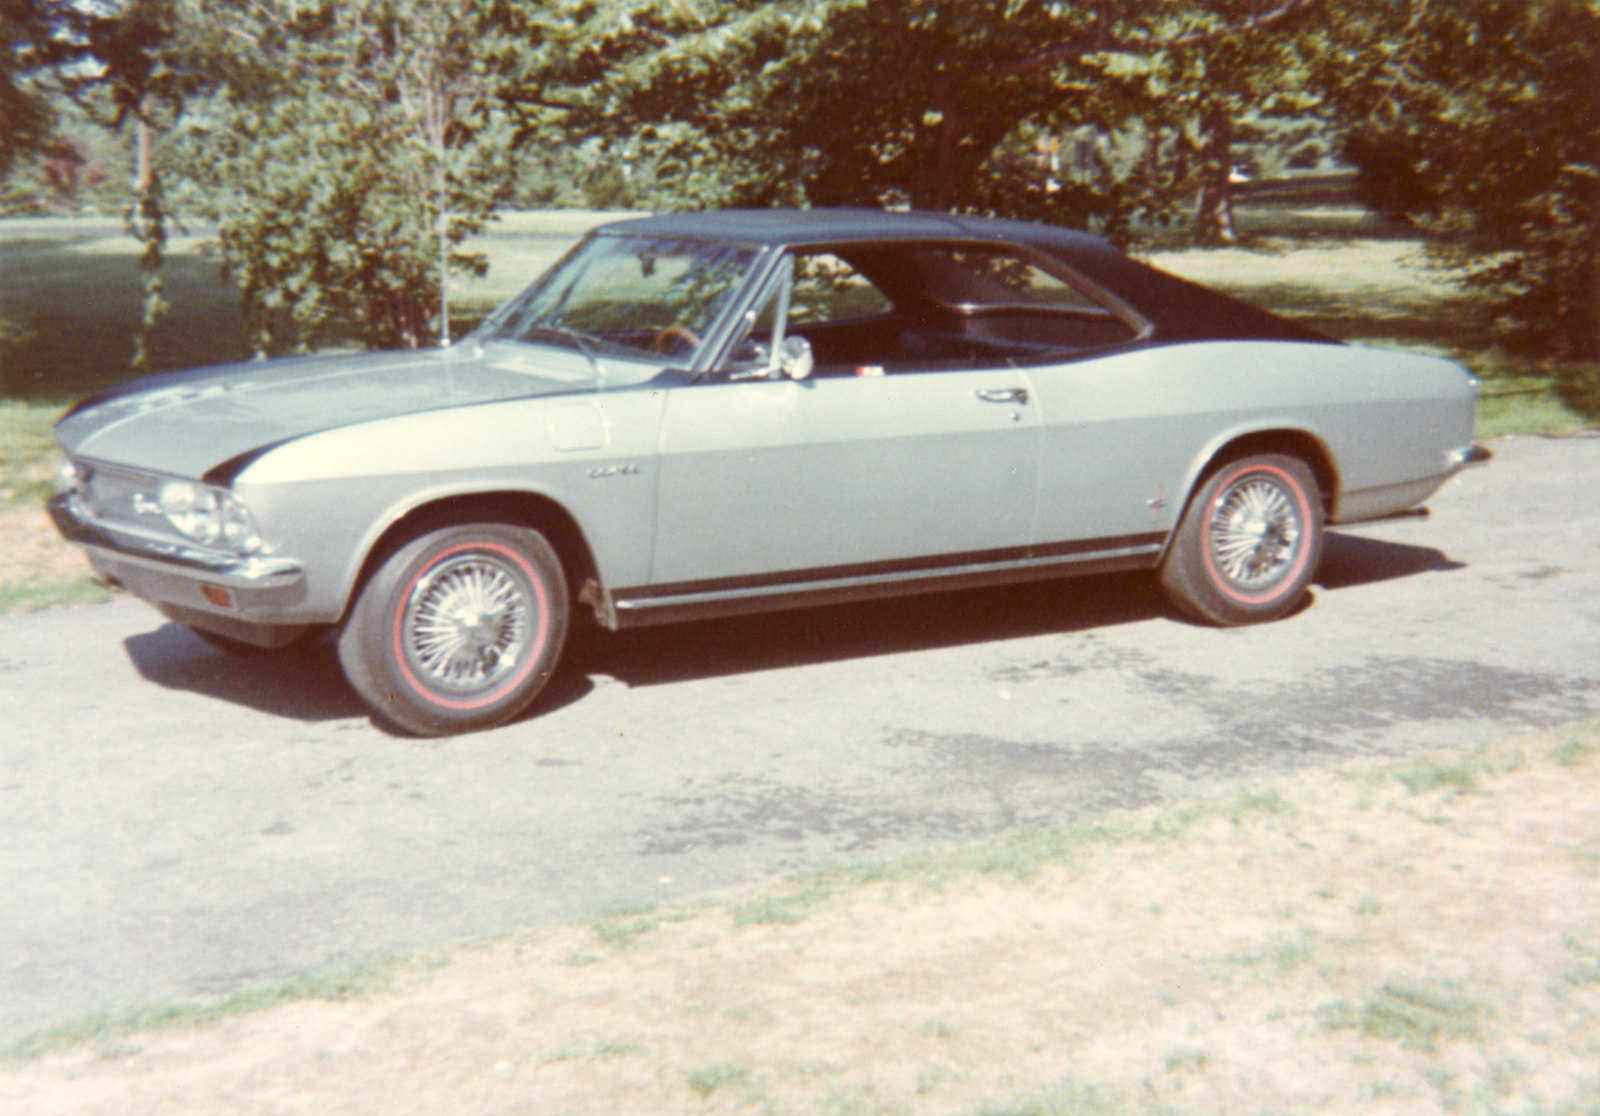 The Corvair Sprint By Fitch - An Original Lost And Found